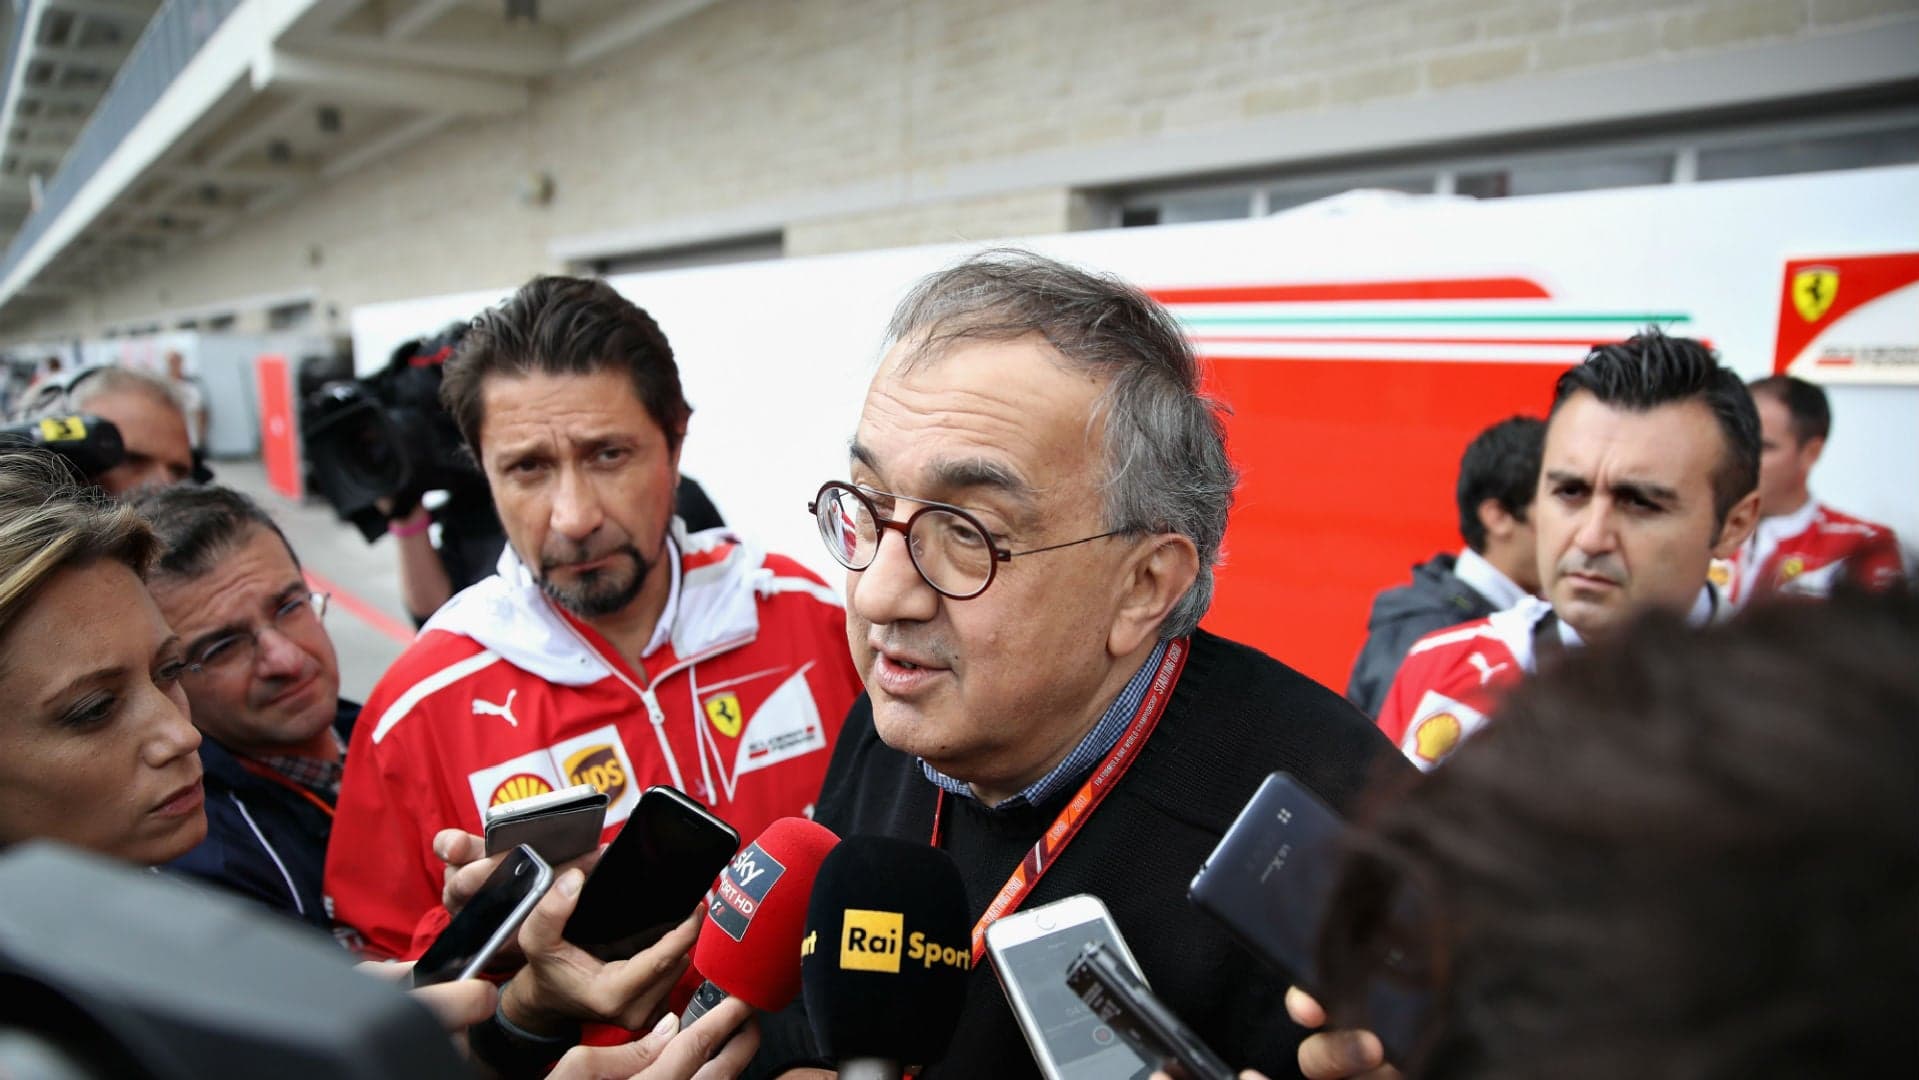 Ferrari Claims It Could Leave Formula 1, Start Its Own Series